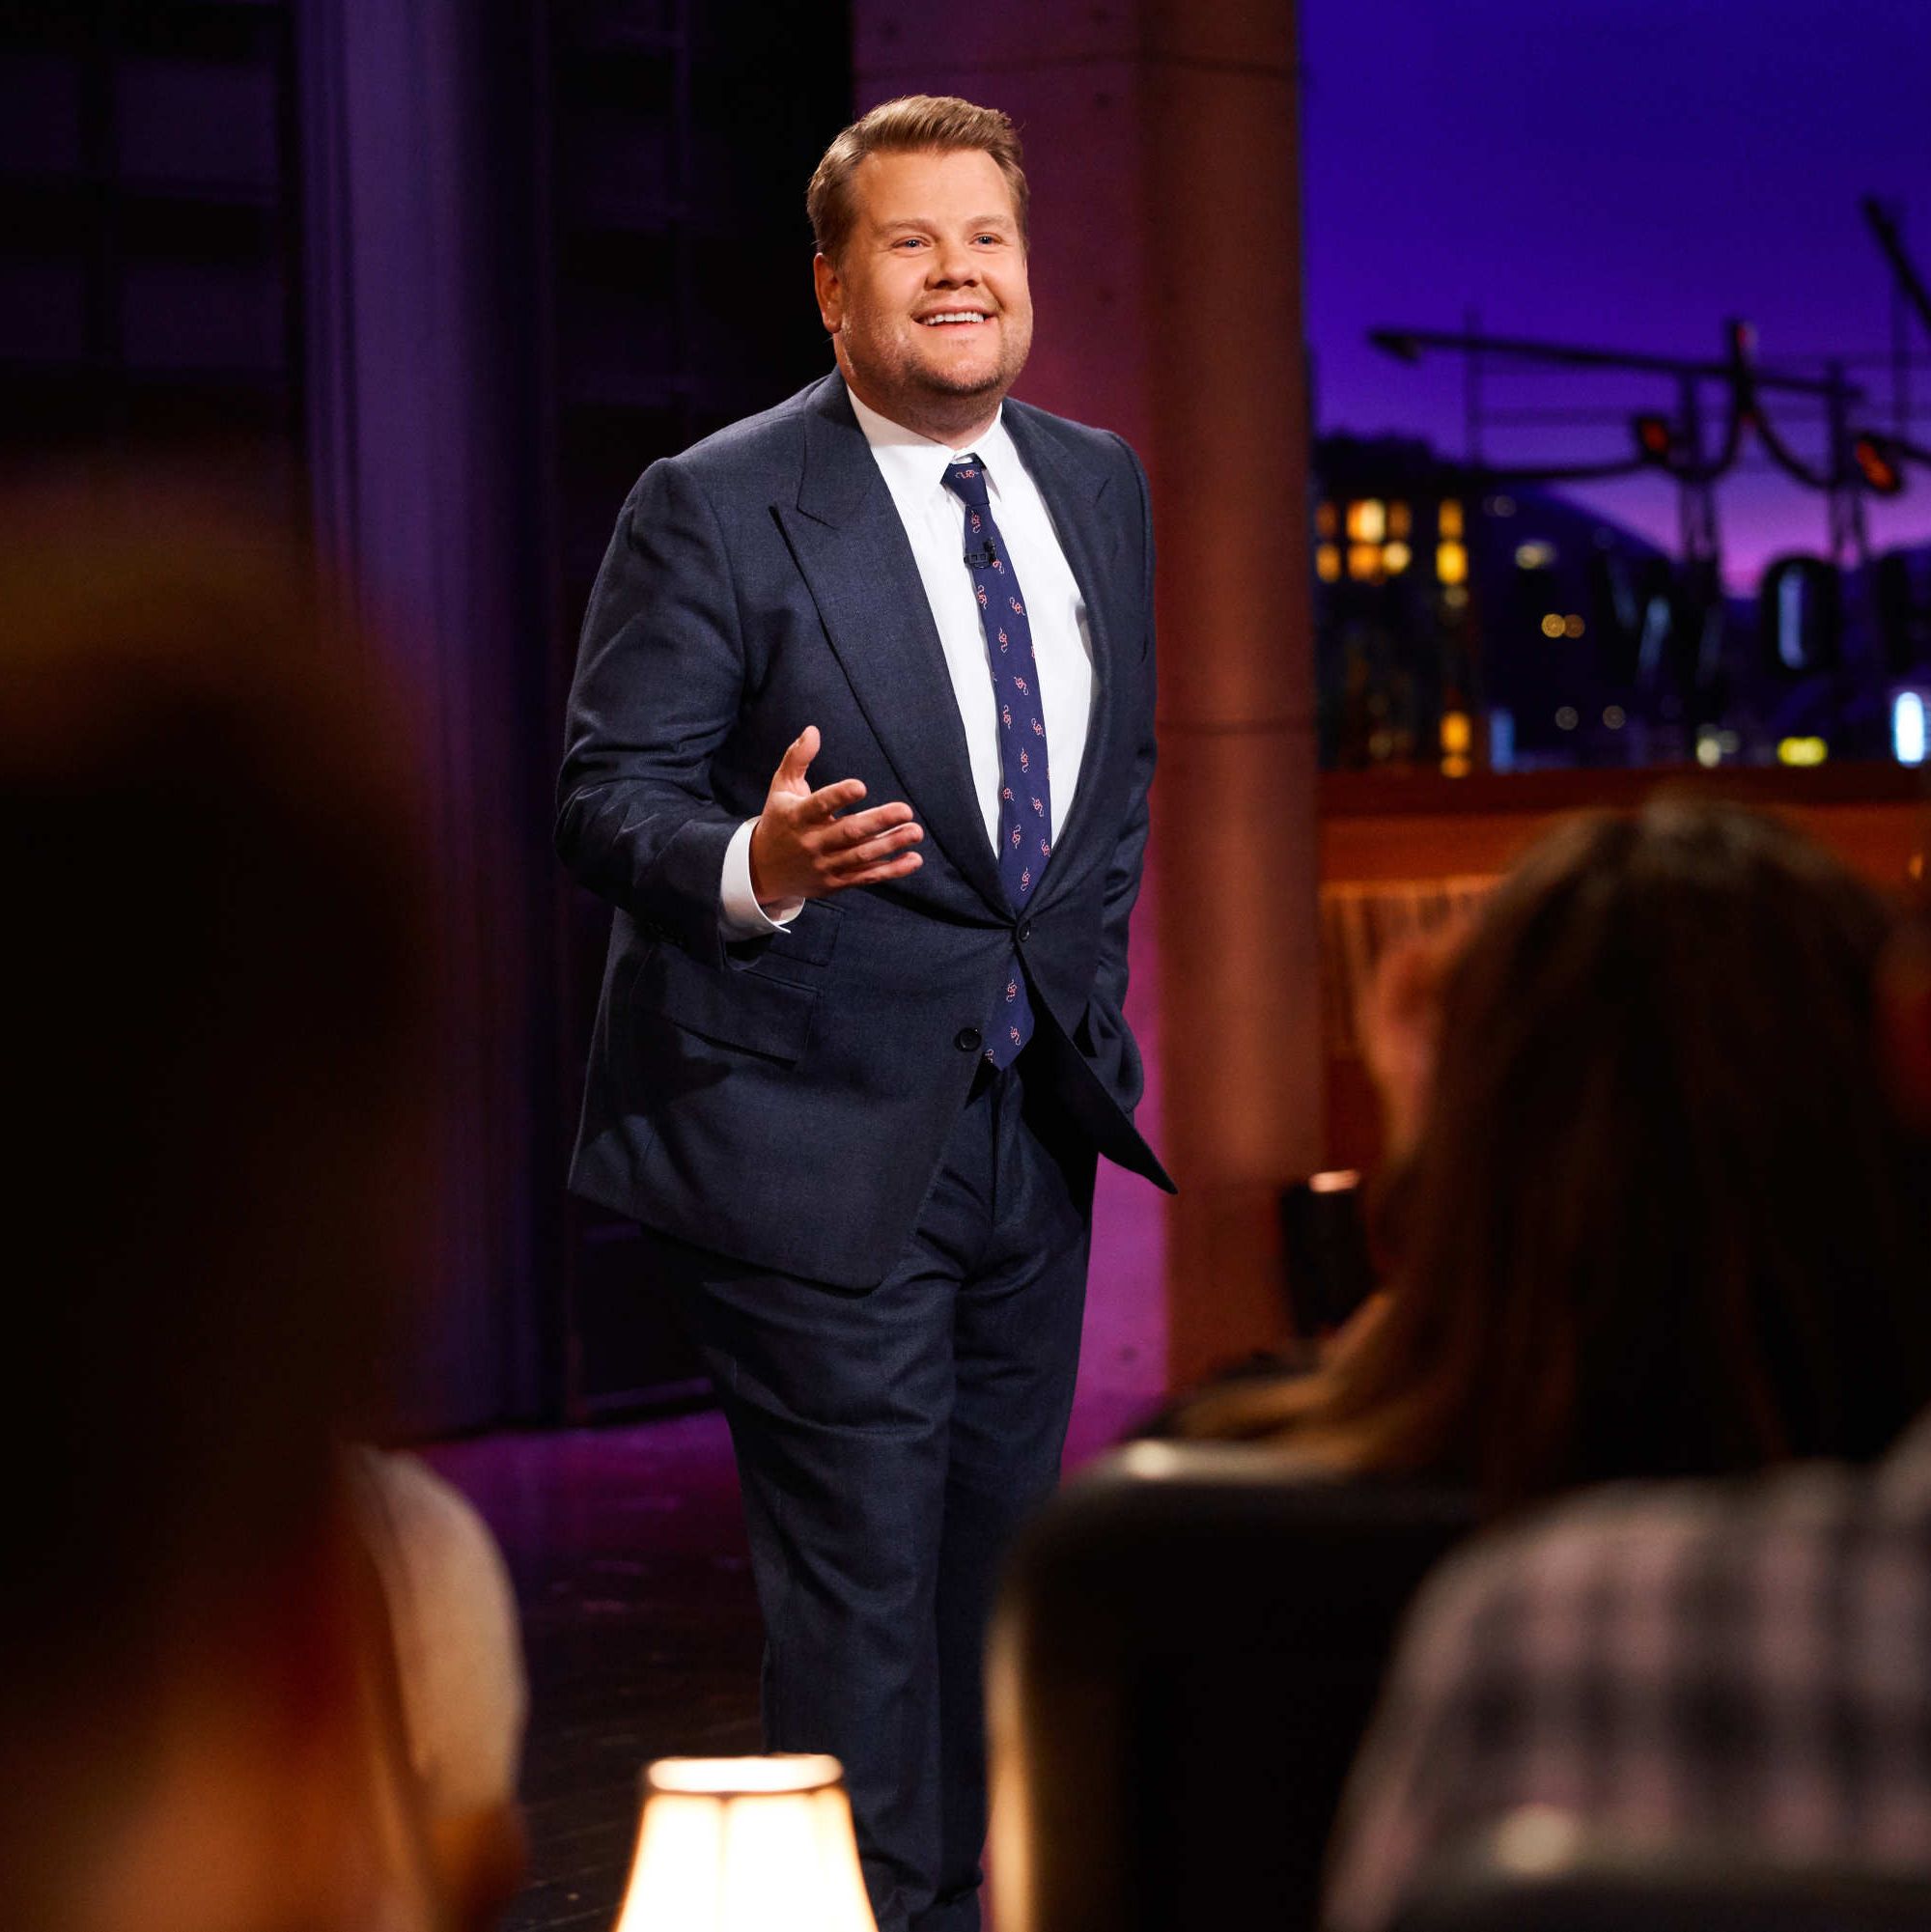 James Corden: “I think I'm making a sacrifice wearing these Spanx.